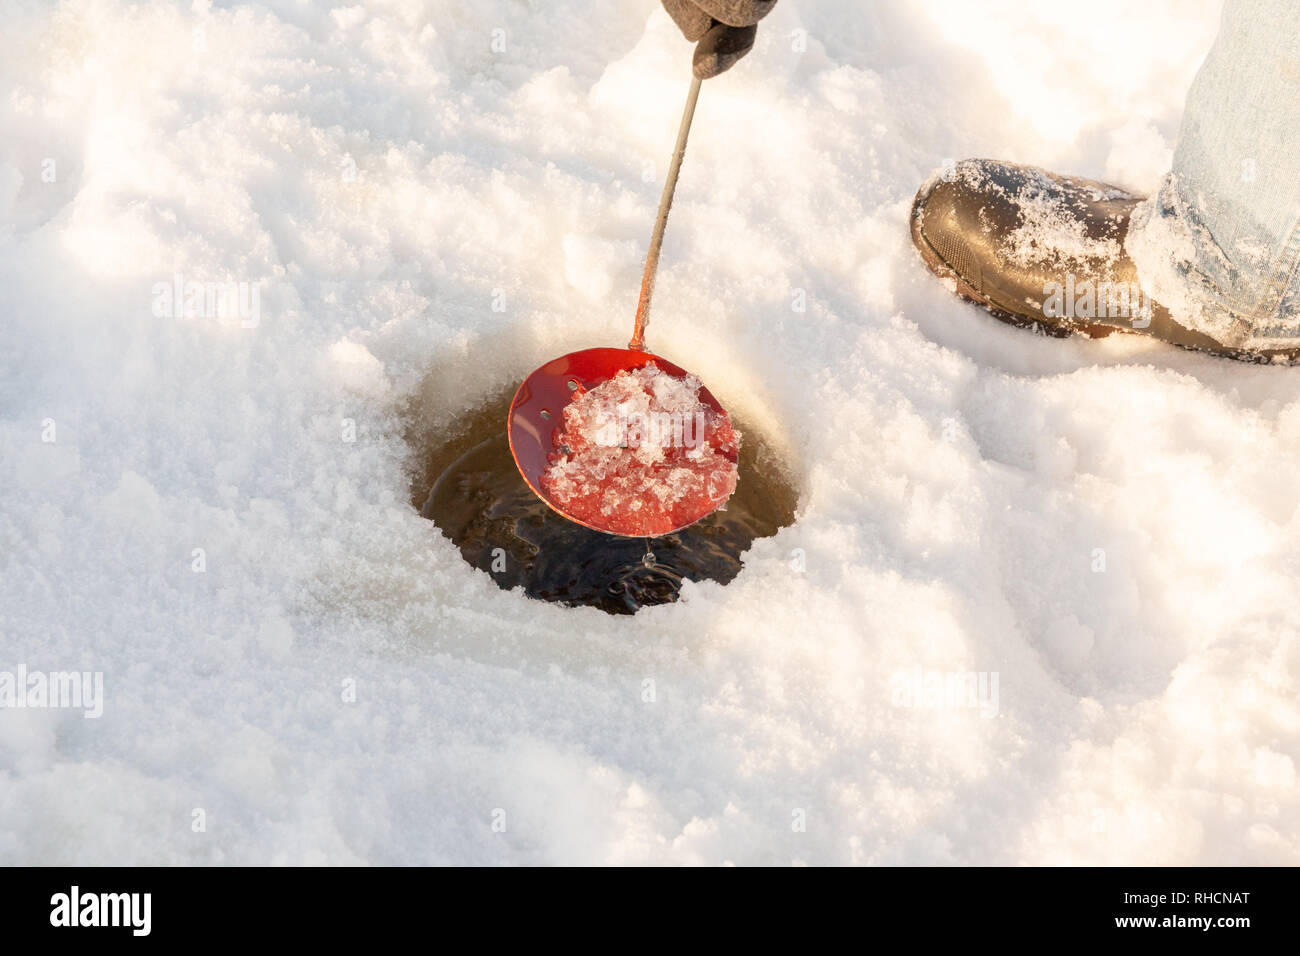 Clearing the ice fishing hole with a homemade ice scooper. Stock Photo